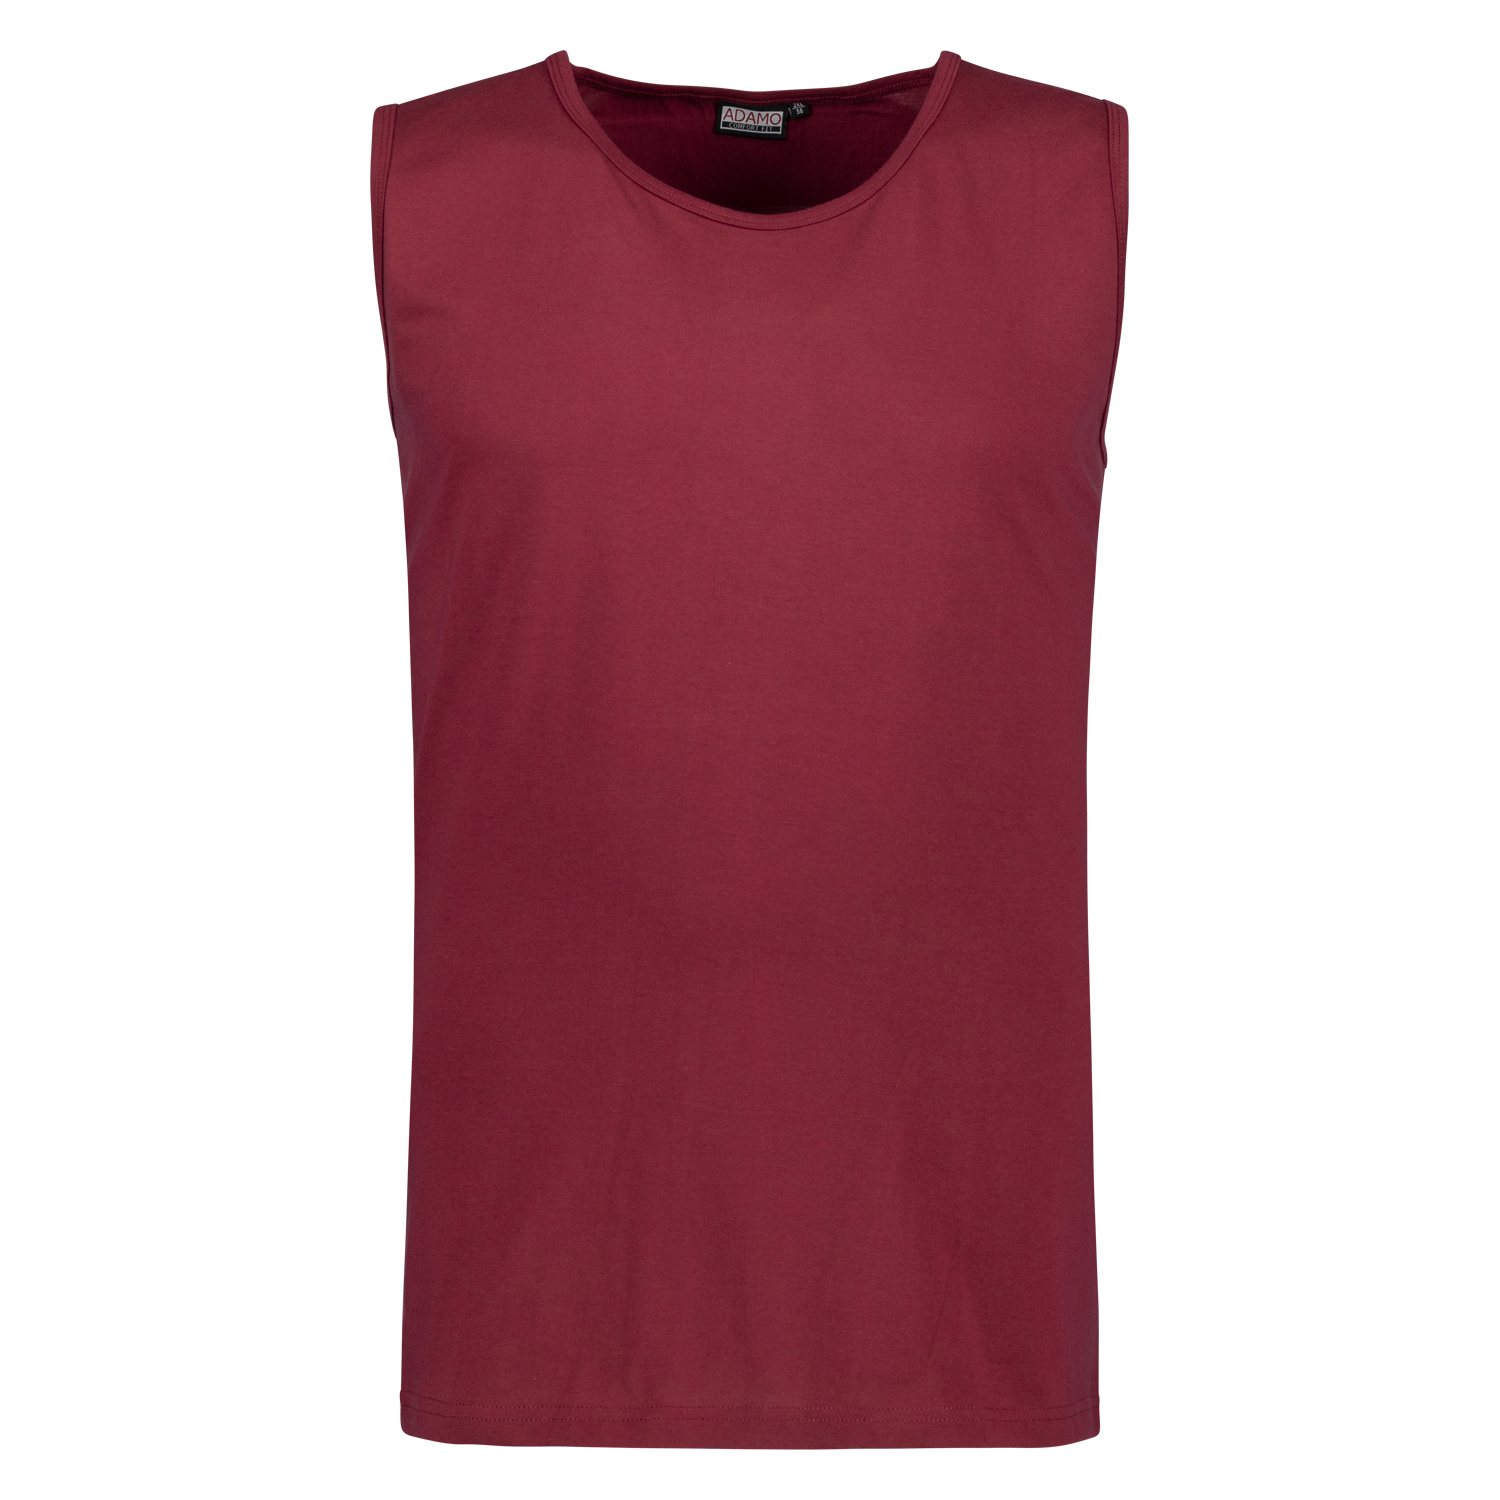 Muscle shirt serie Rod COMFORT FIT by ADAMO up to oversize 12XL - colour burgundy red